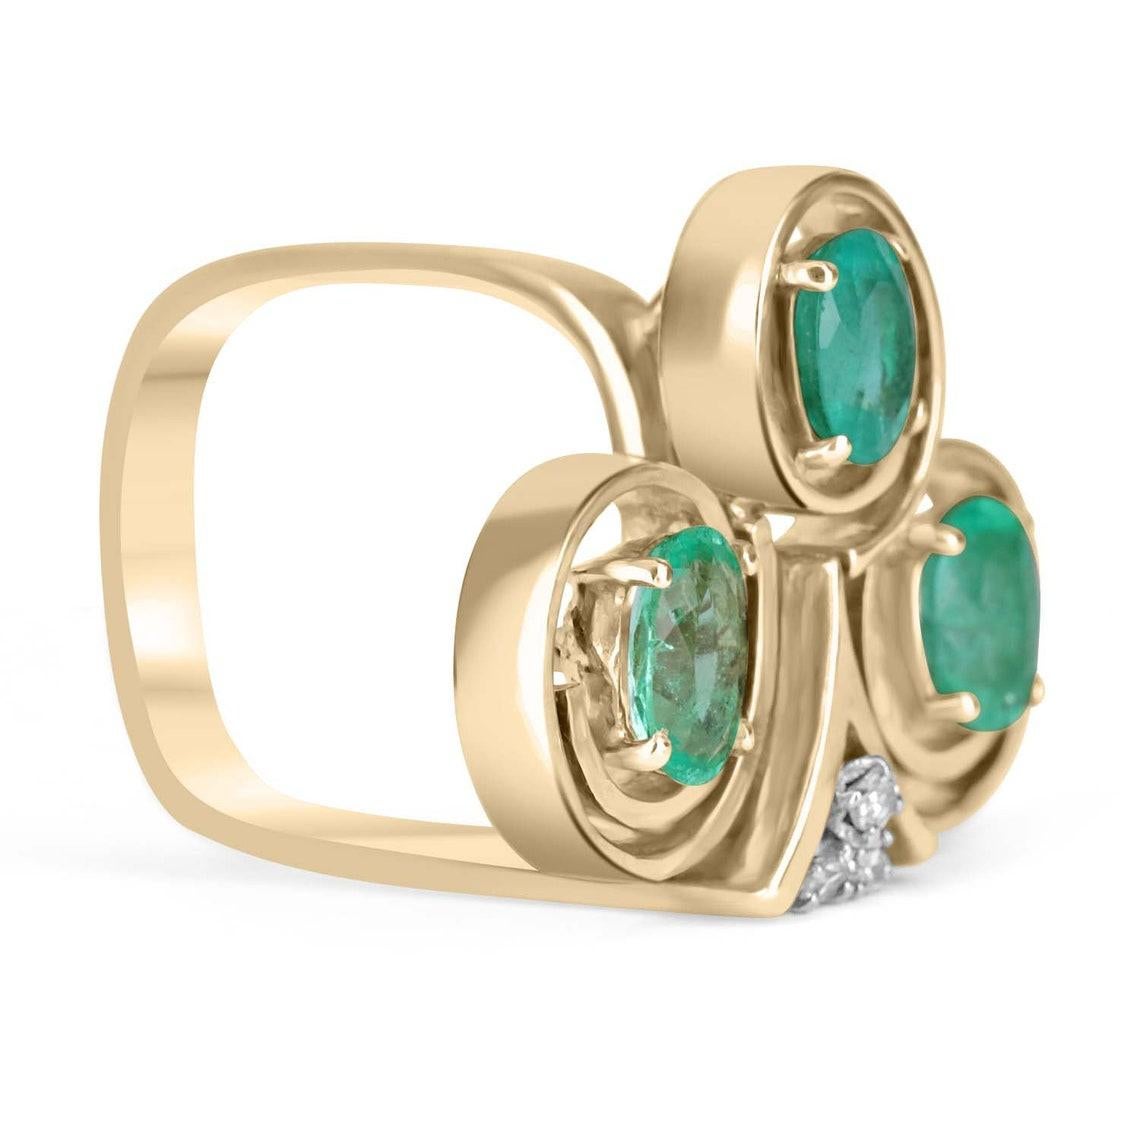 A conversational, statement piece made with natural Colombian emeralds and step-cut old diamonds. A unique custom-created handmade ring estimated to be dated around the 1910s Art Nouveau era. Dexterously crafted in gleaming 14K yellow gold, this